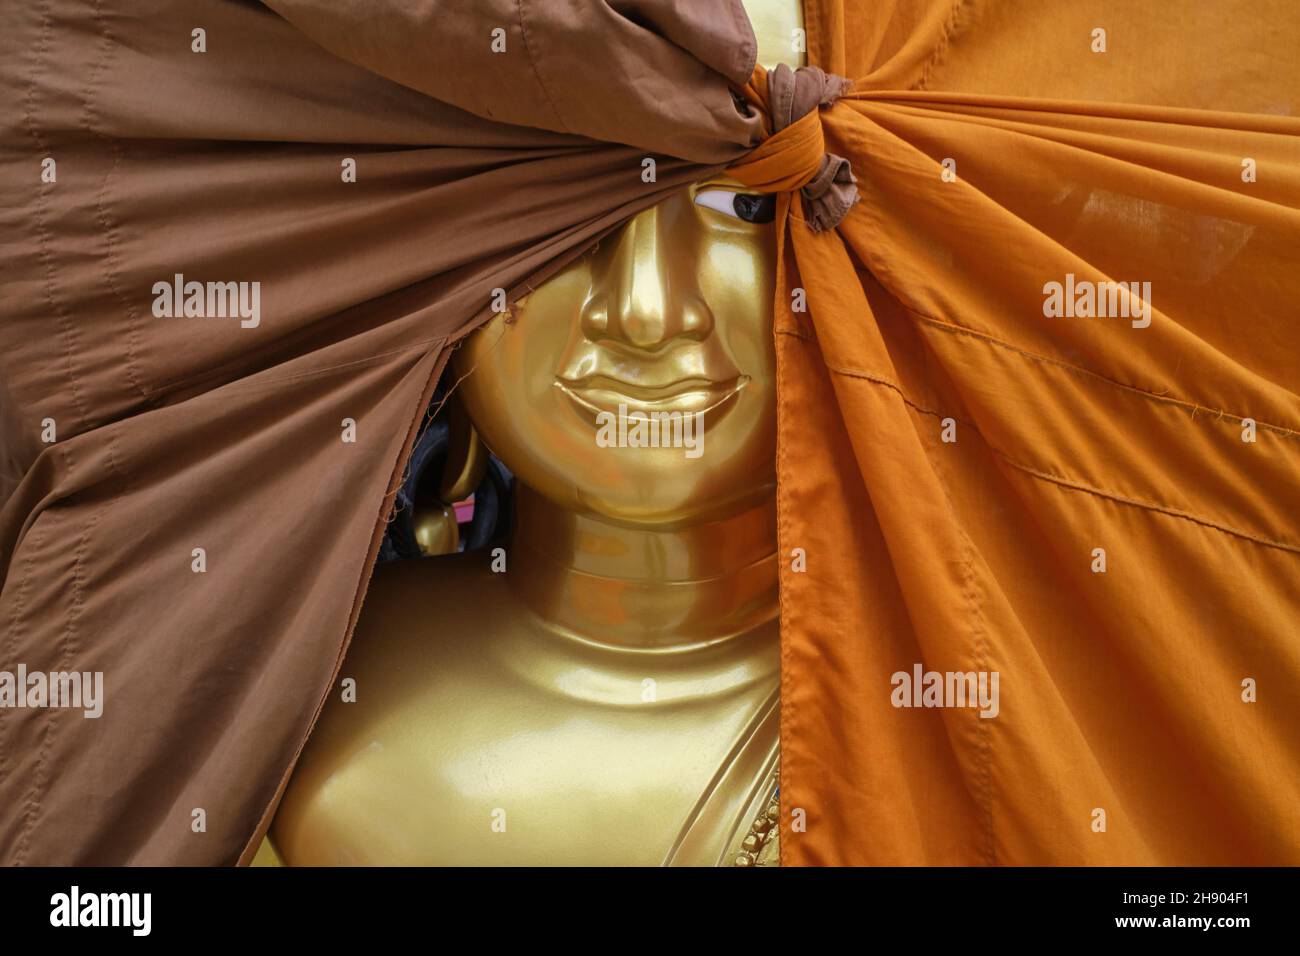 Buddha statue at a factory for Buddhist objects in Bamrung Muang Rd., Bangkok, Thailand, one eye peering out from behind an orange & brown cloth cover Stock Photo